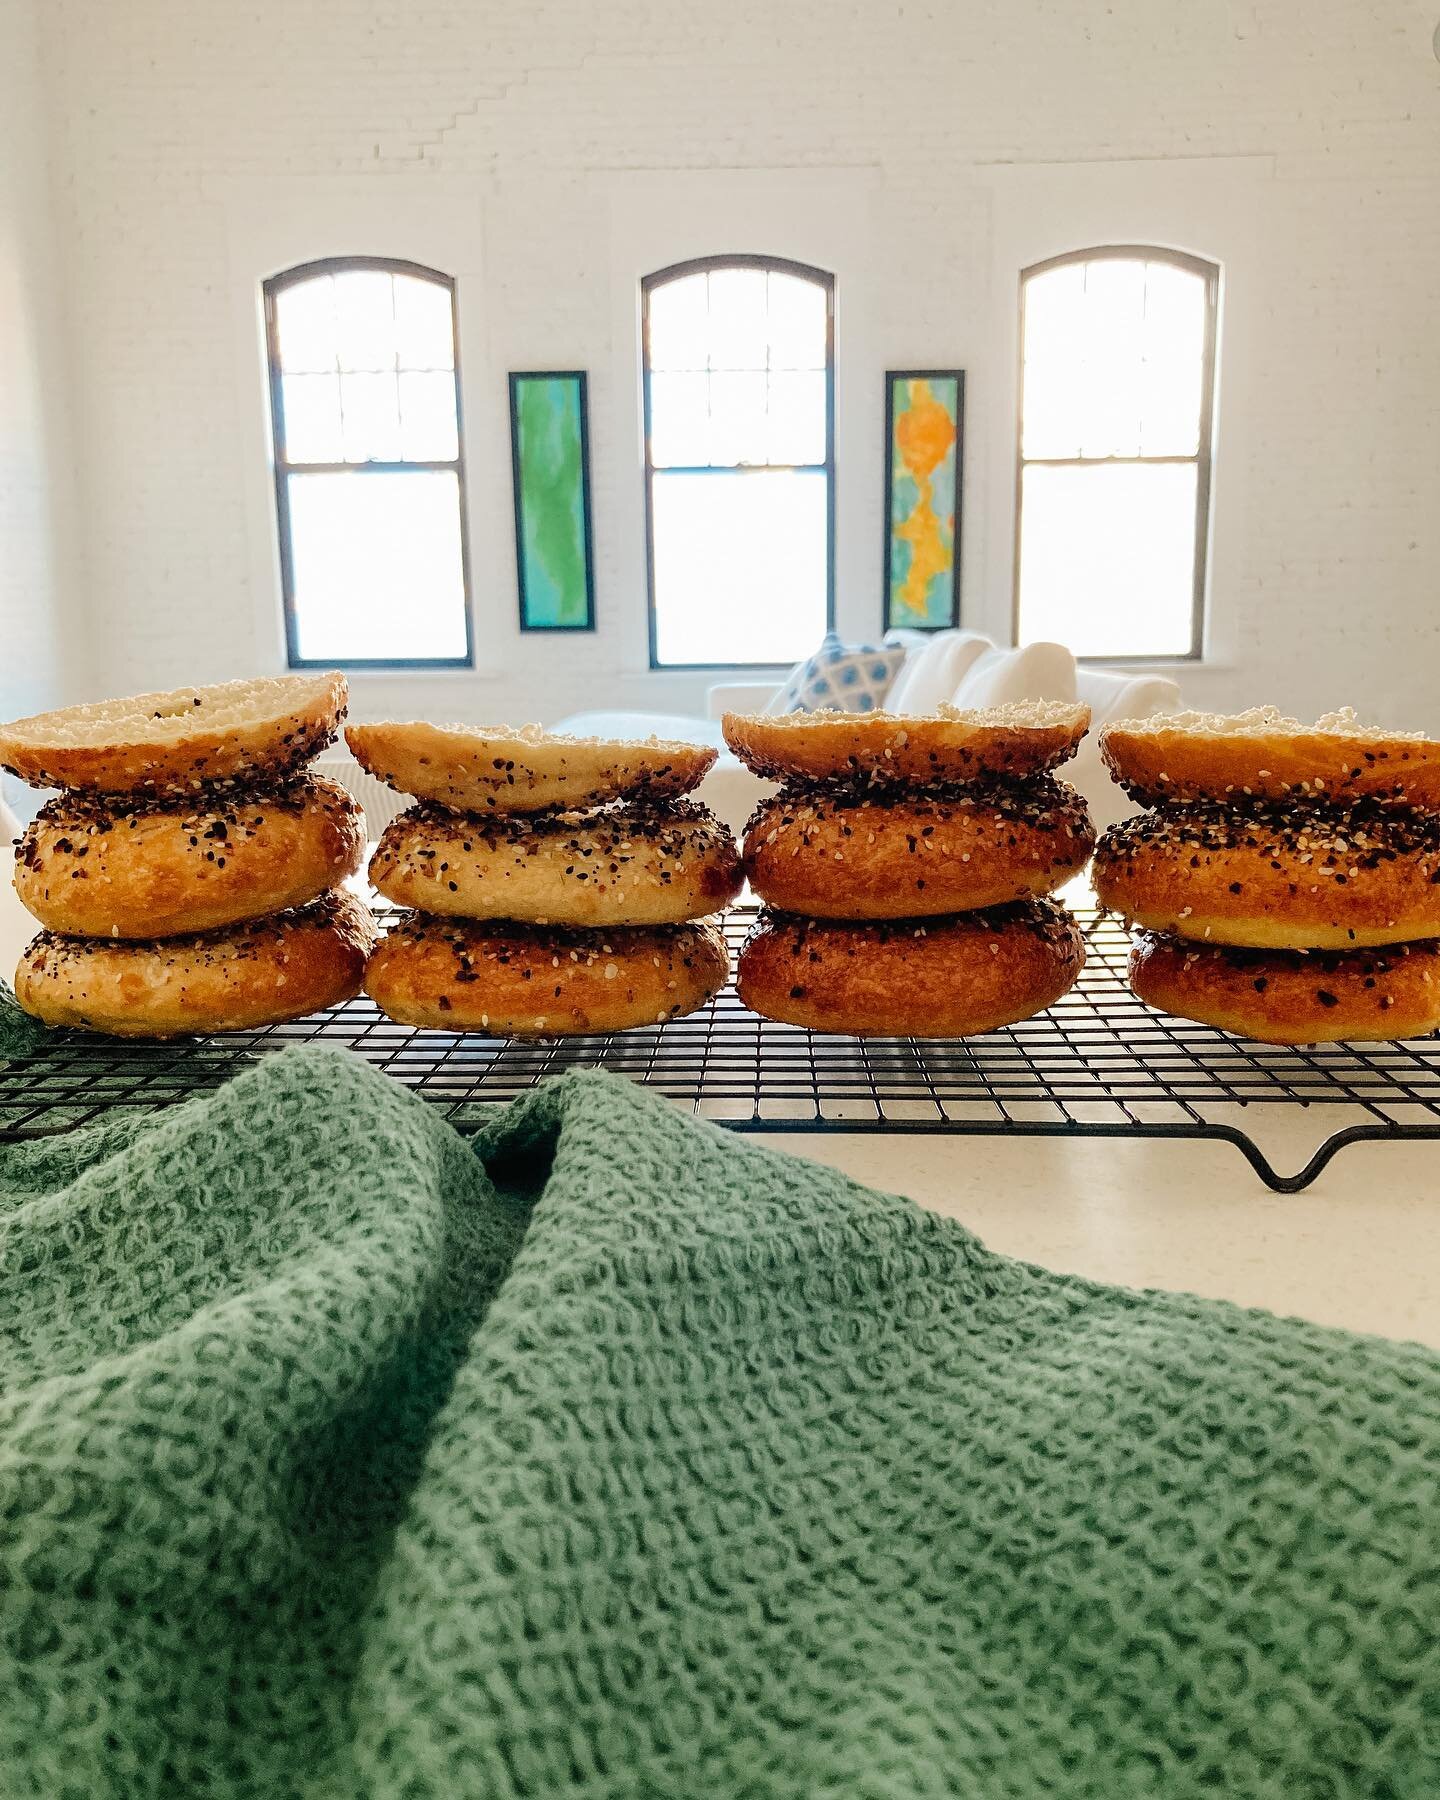 Testing oven temp and bake times to get these beauties just right. Spring is right around the corner and we can&rsquo;t wait!!!